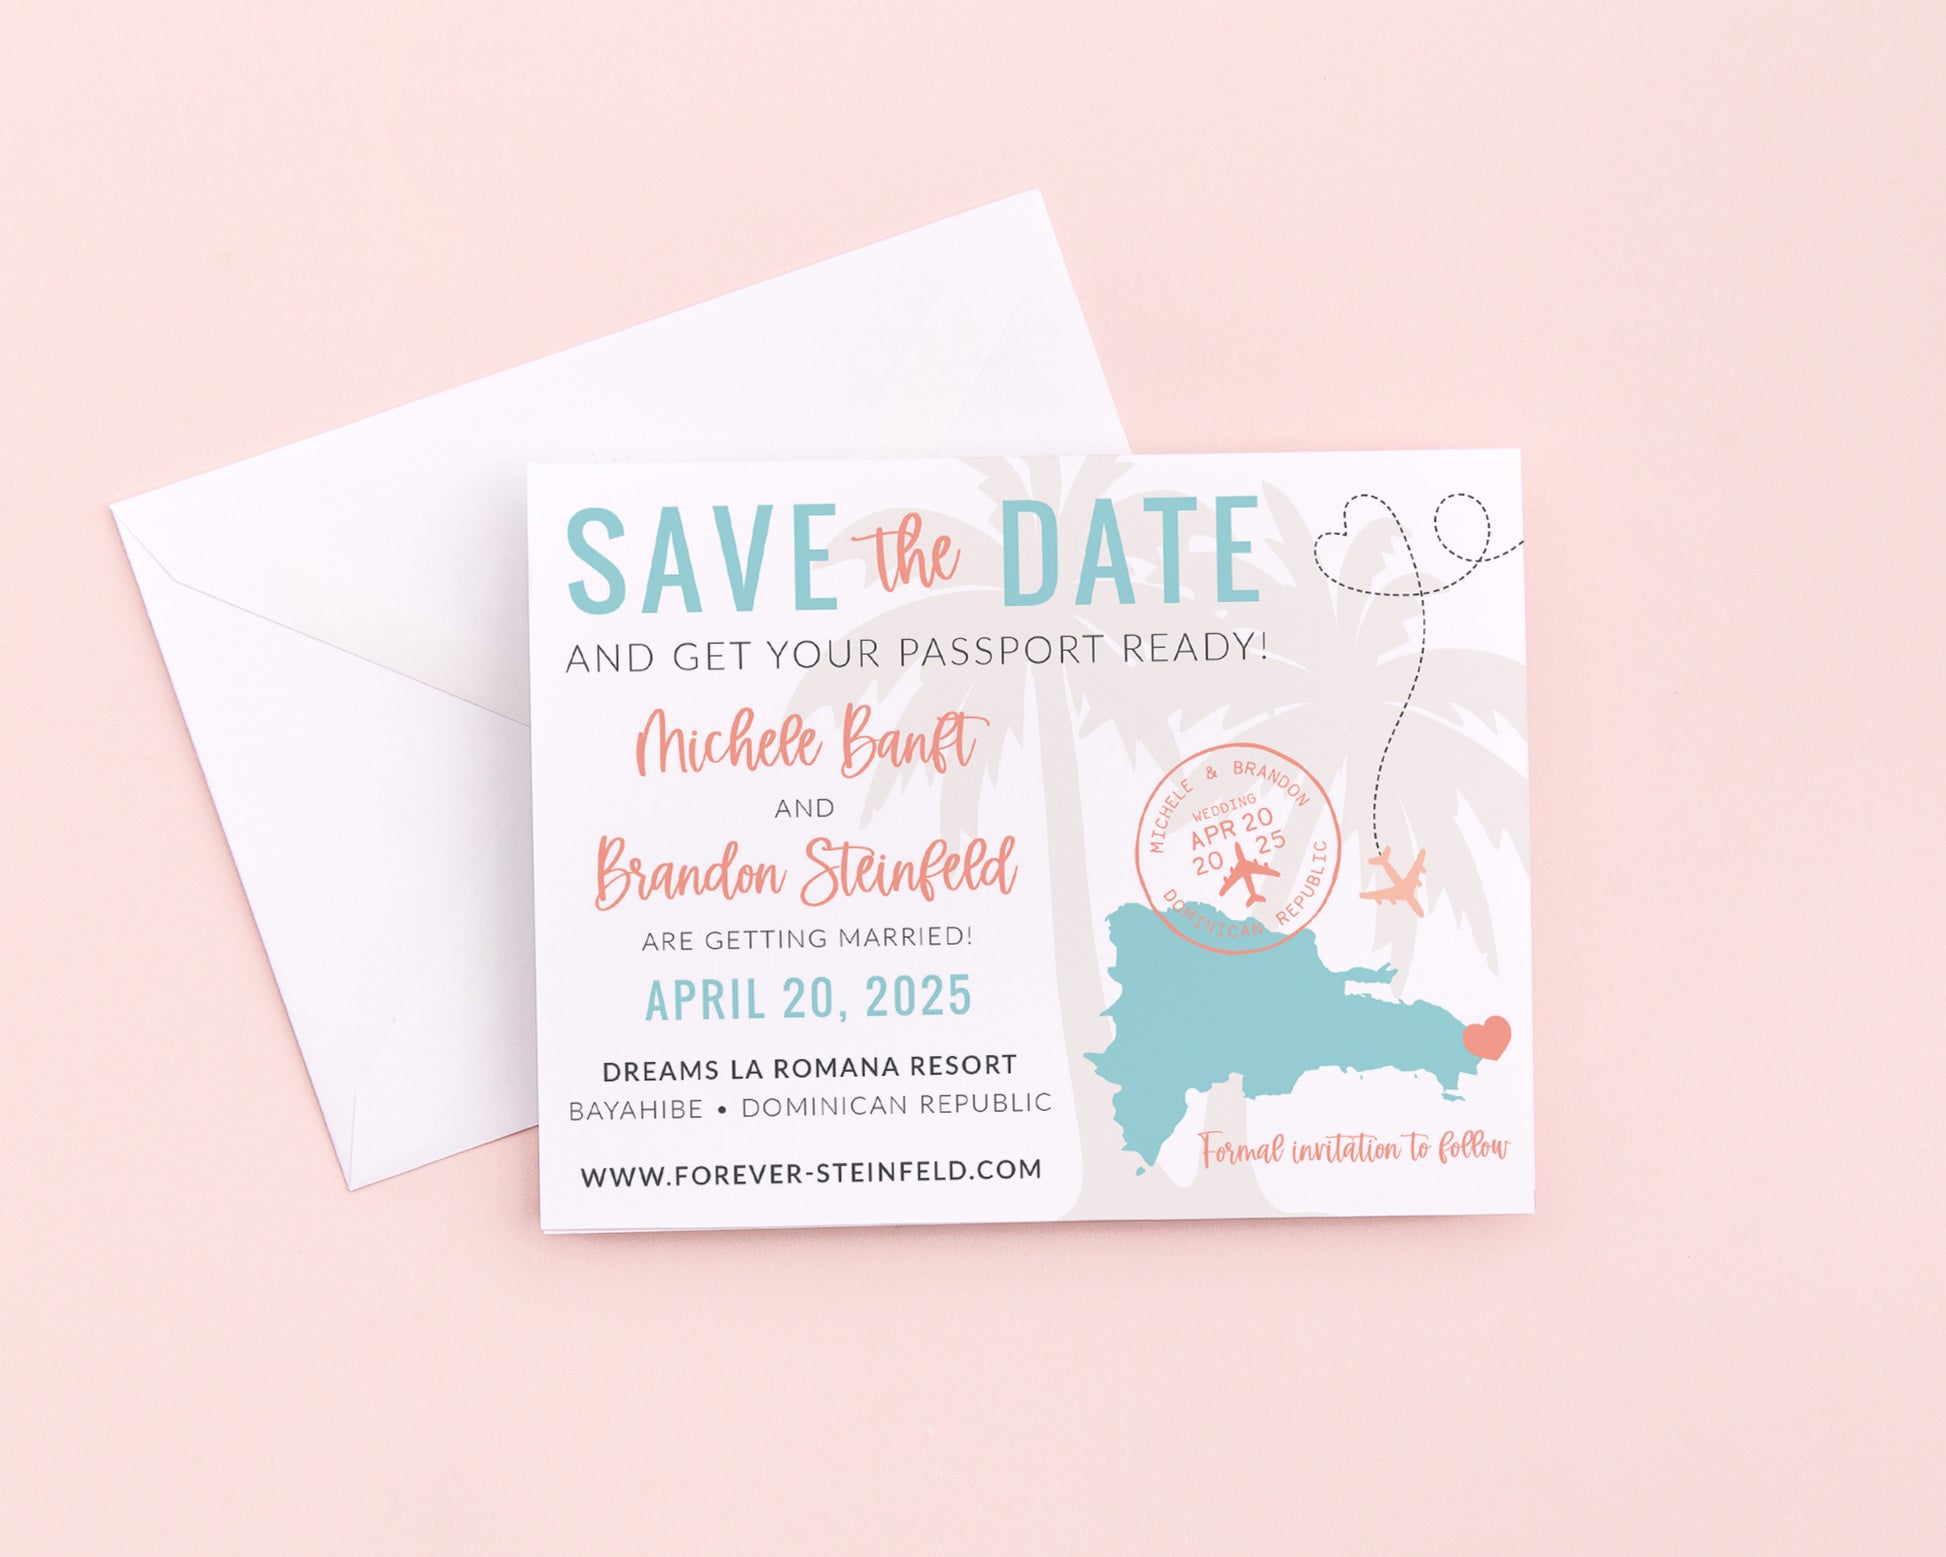 Destination Wedding Save the Date - Save the Date and get your passport ready with passport stamp and destination map.